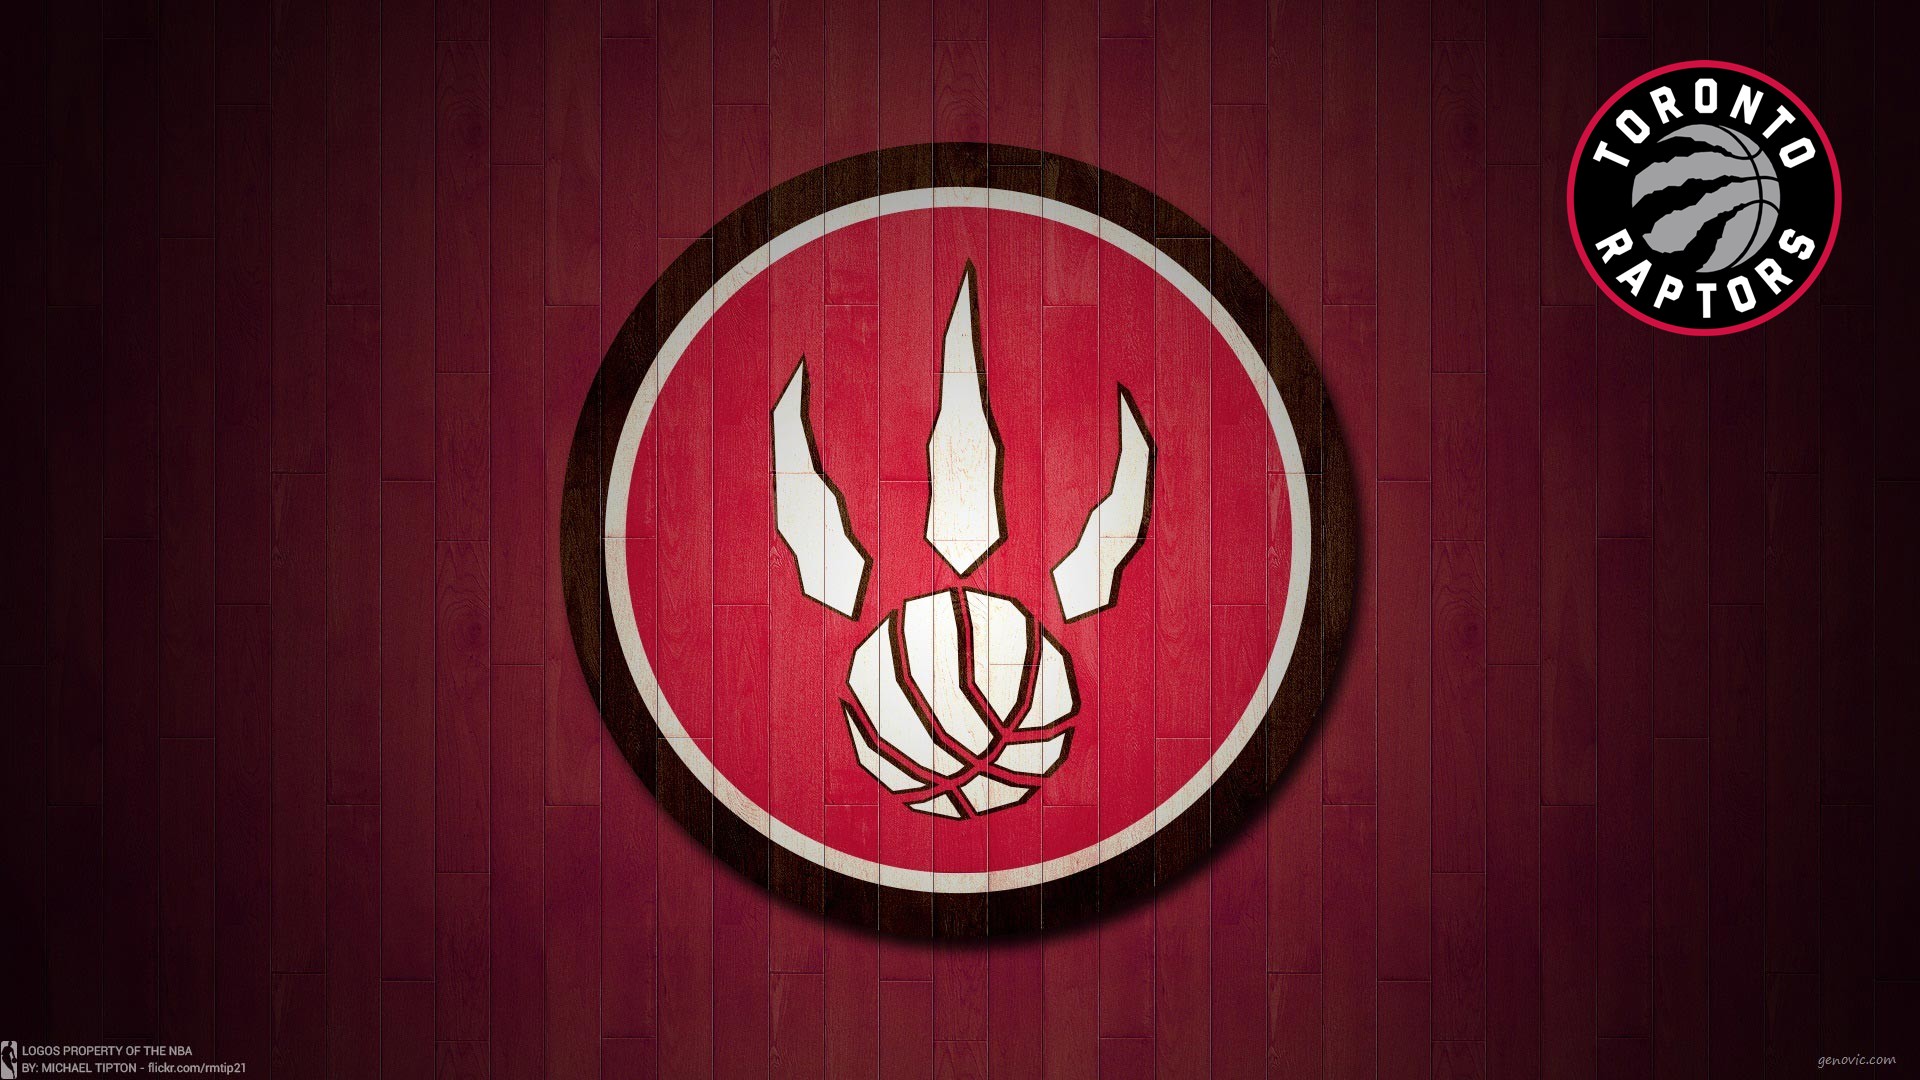 HD Desktop Wallpaper Toronto Raptors with image dimensions 1920X1080 pixel. You can make this wallpaper for your Desktop Computer Backgrounds, Windows or Mac Screensavers, iPhone Lock screen, Tablet or Android and another Mobile Phone device